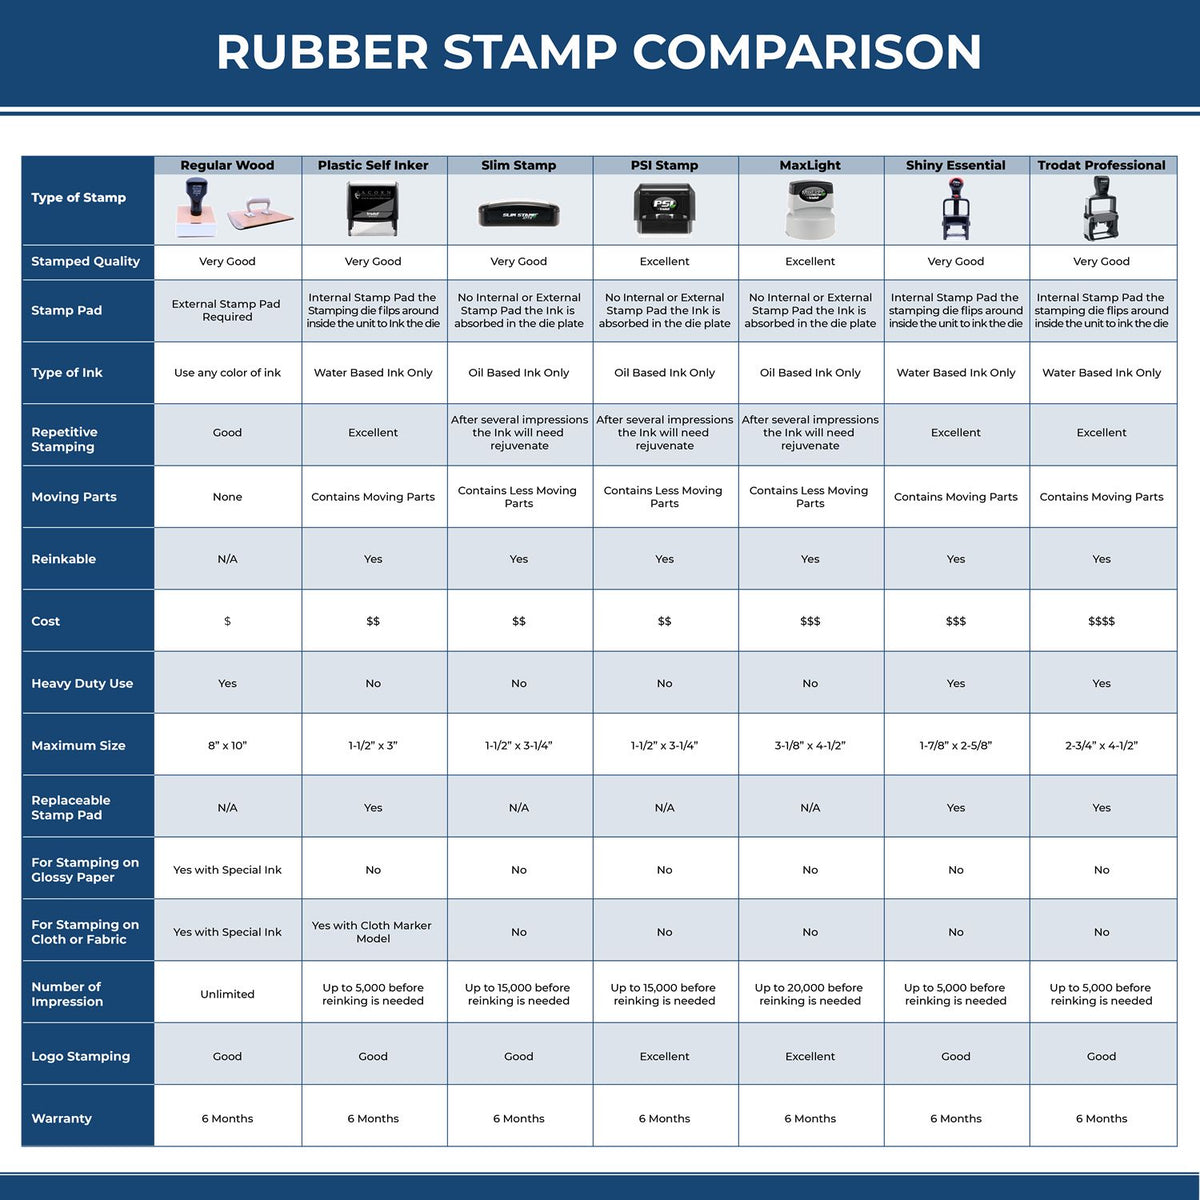 Large Self Inking Balanced Stamp 4569S Rubber Stamp Comparison